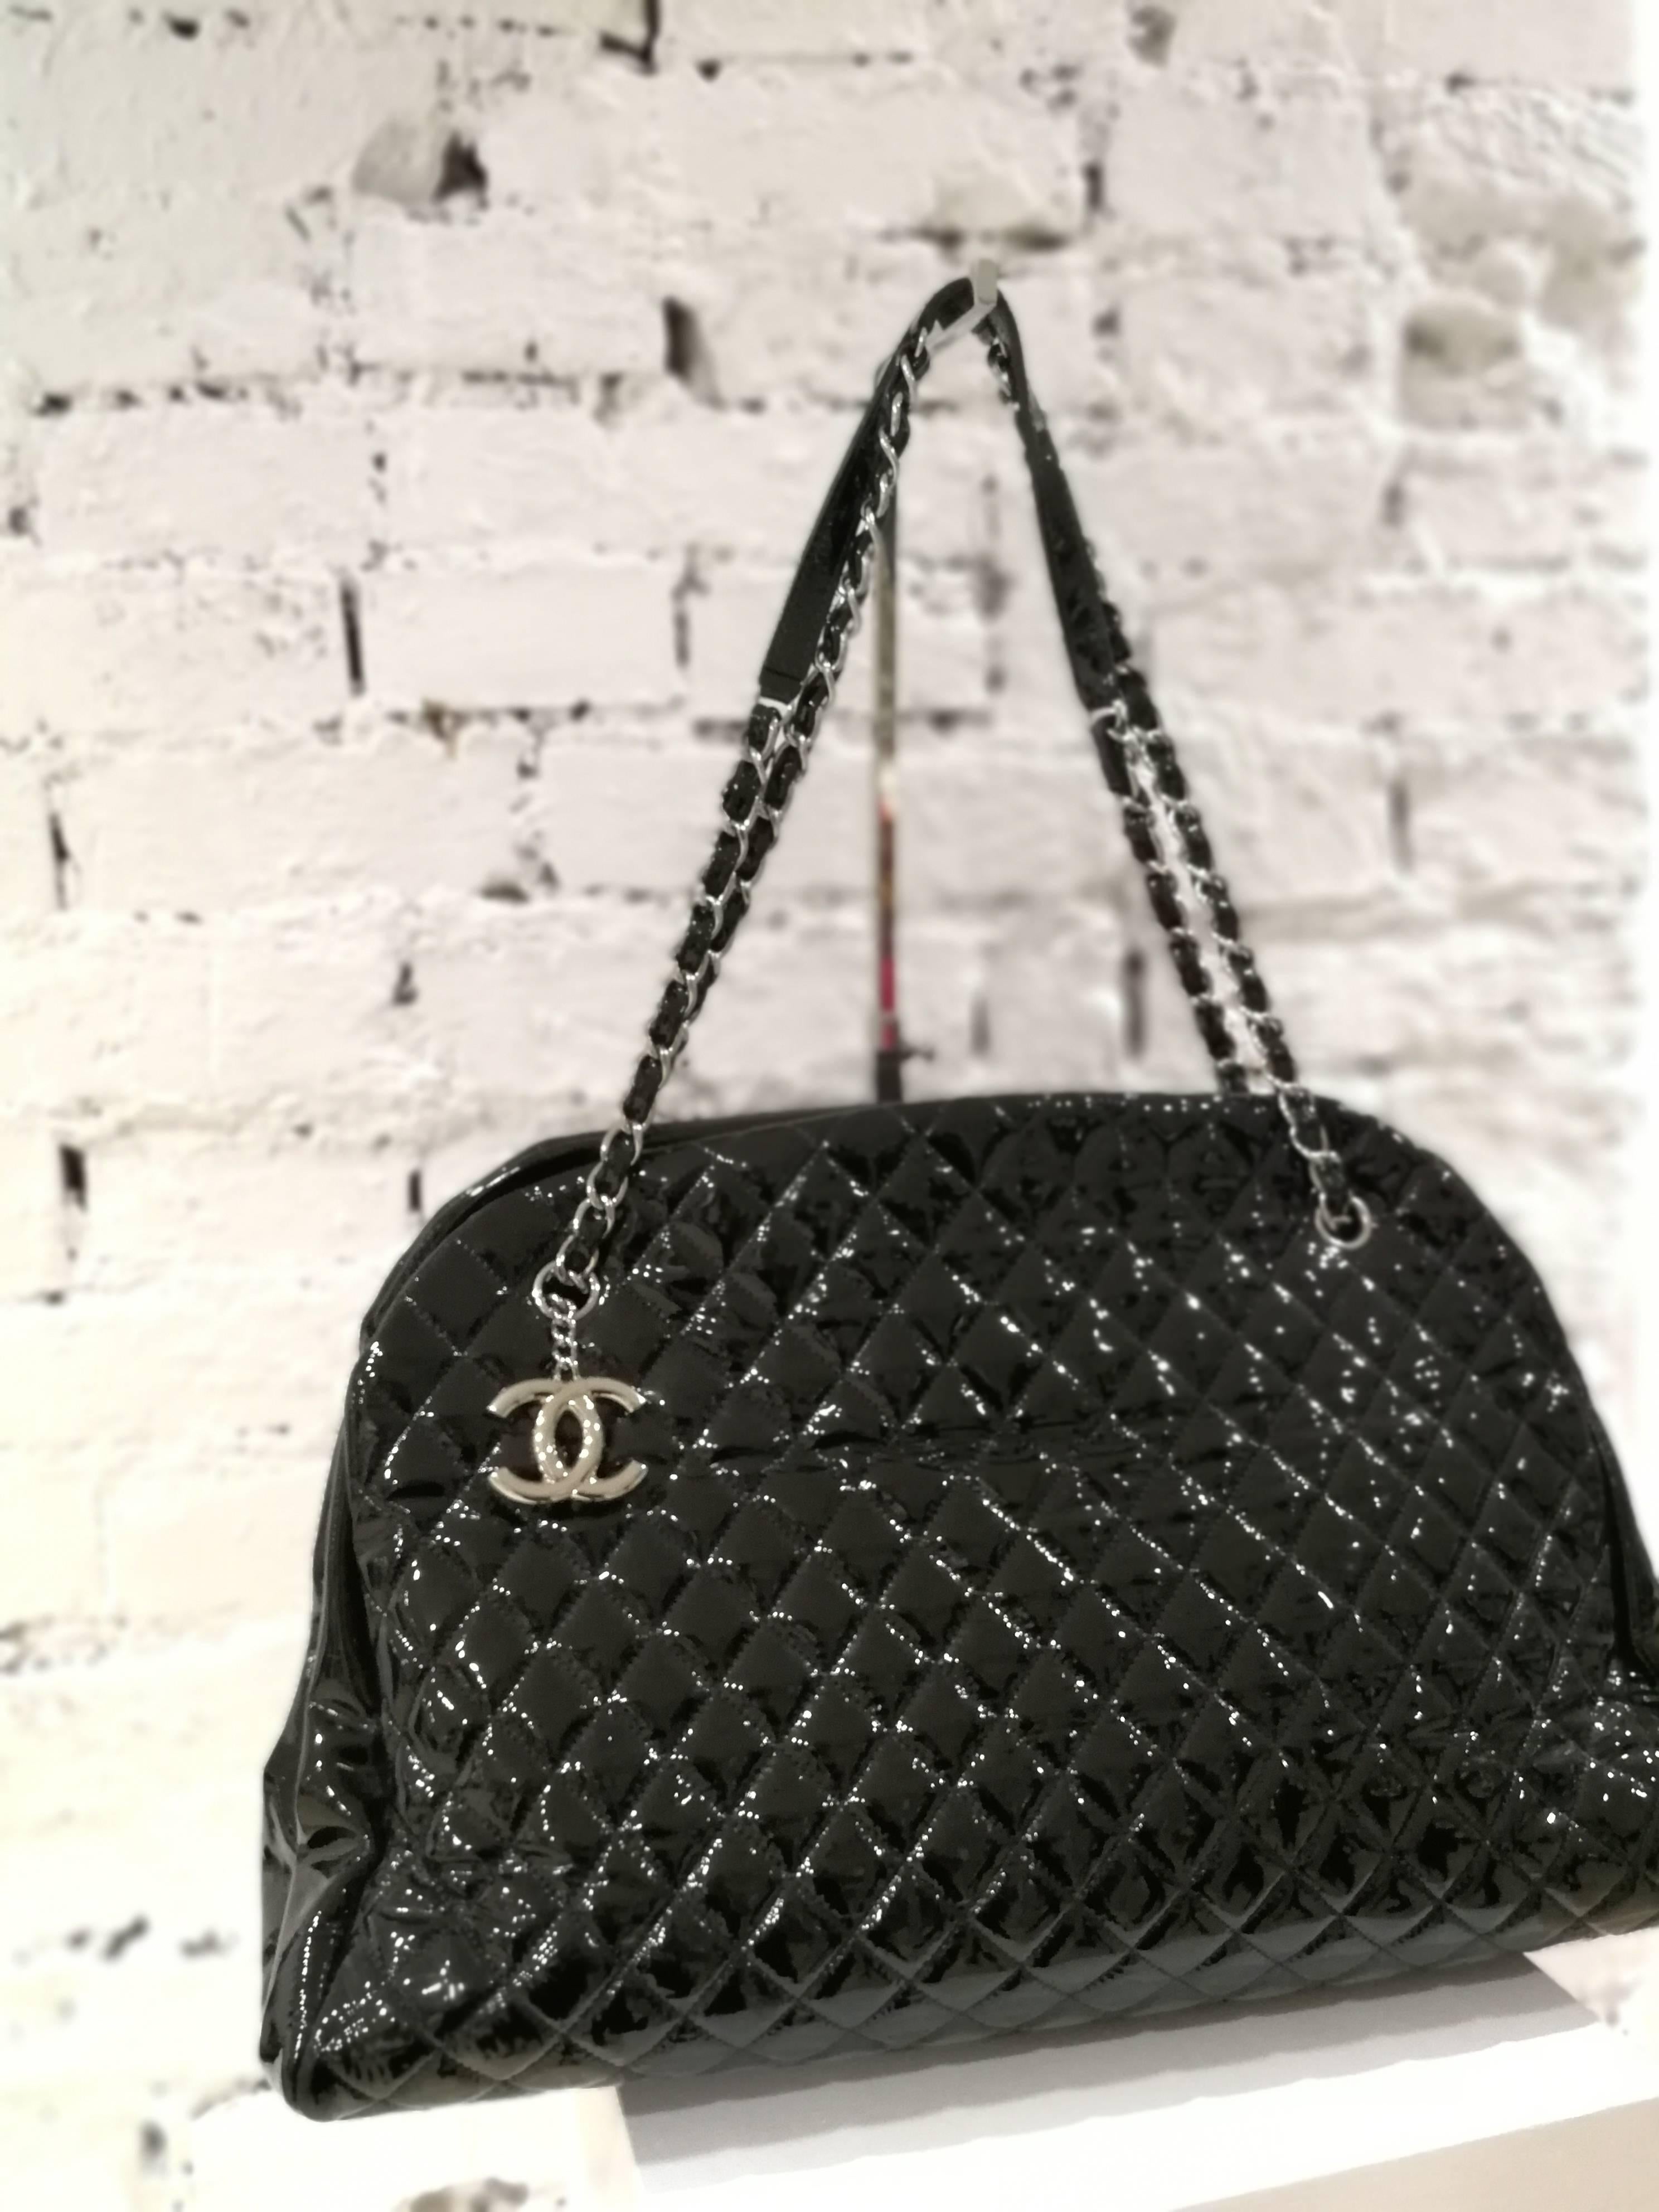 Chanel Just Mademoiselle Bowler Black patent Leather Bag 6